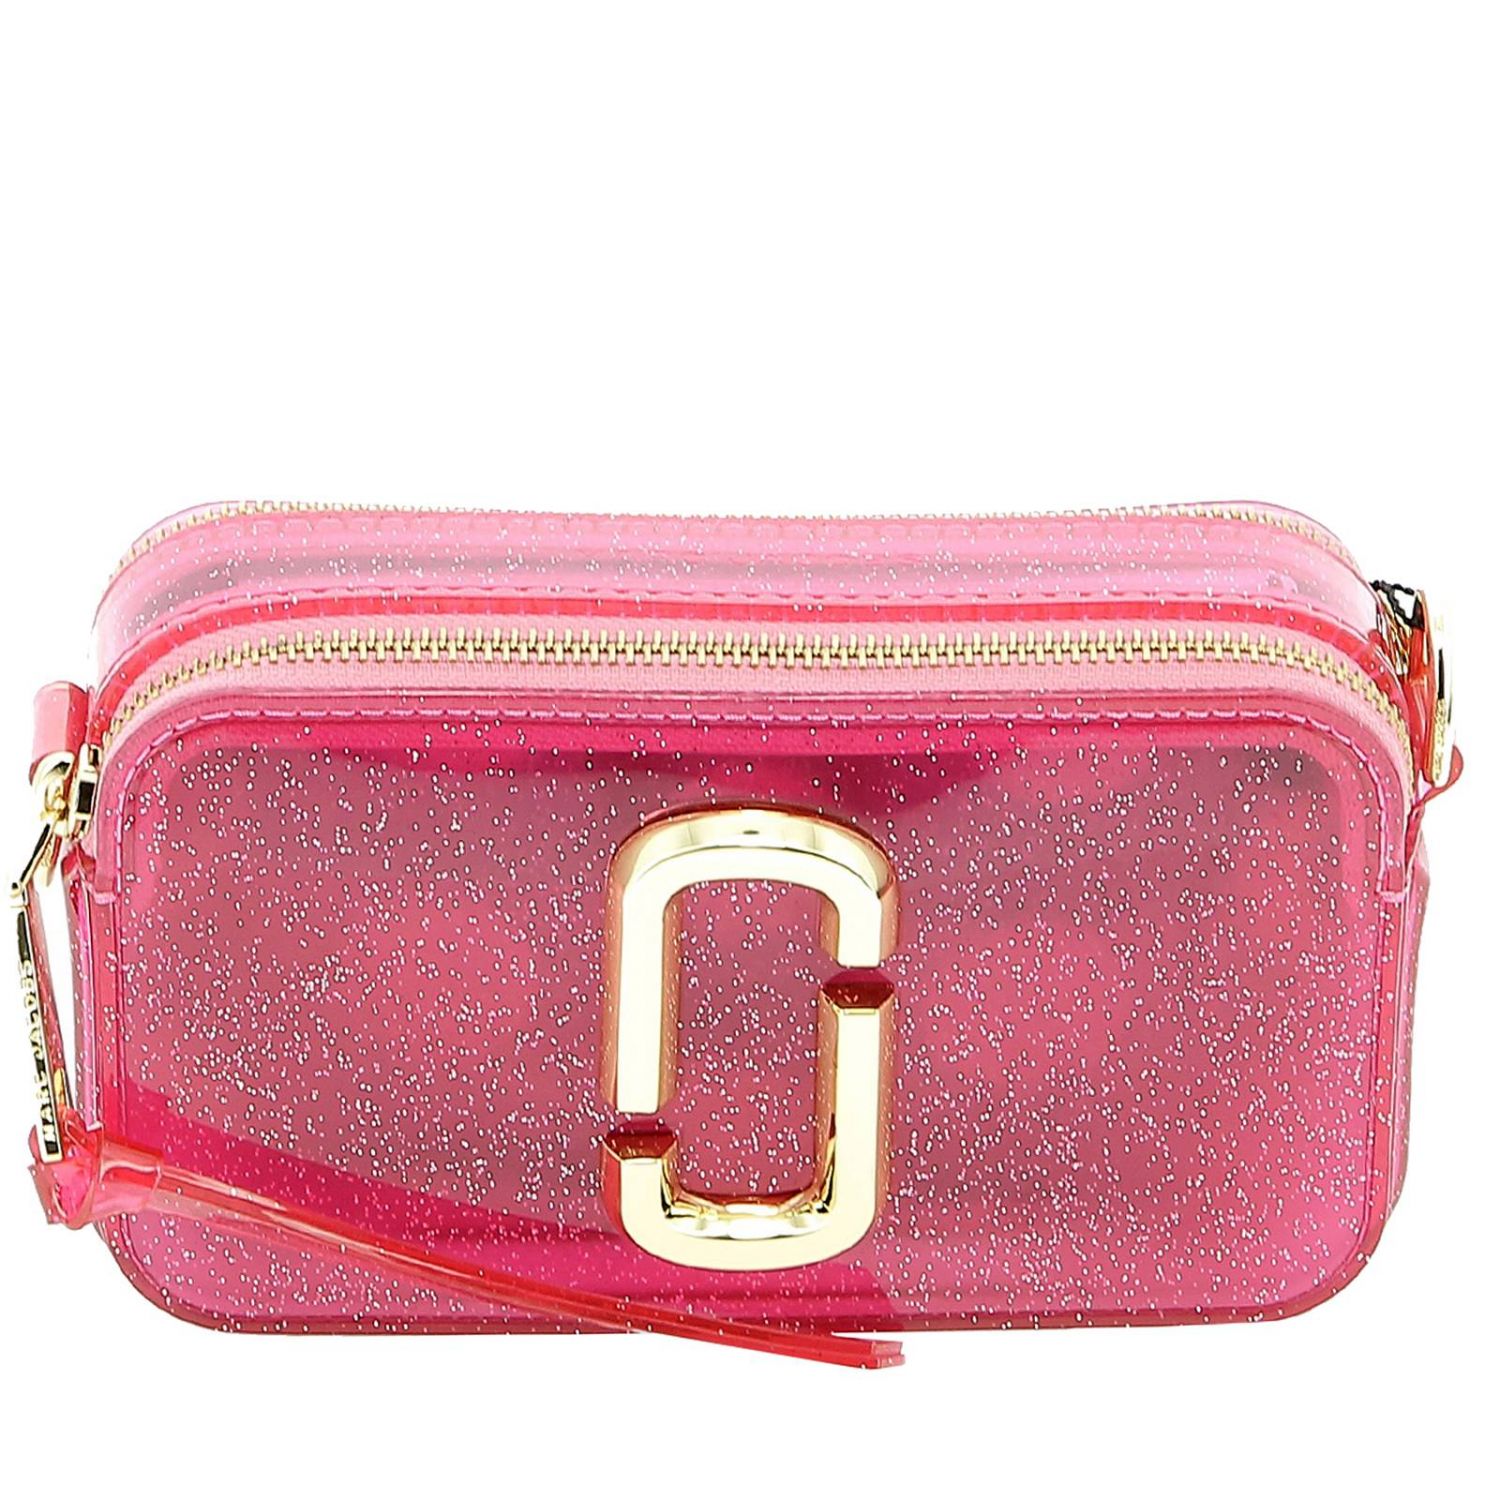 Marc Jacobs Outlet: crossbody bags for woman - Pink | Marc Jacobs ...